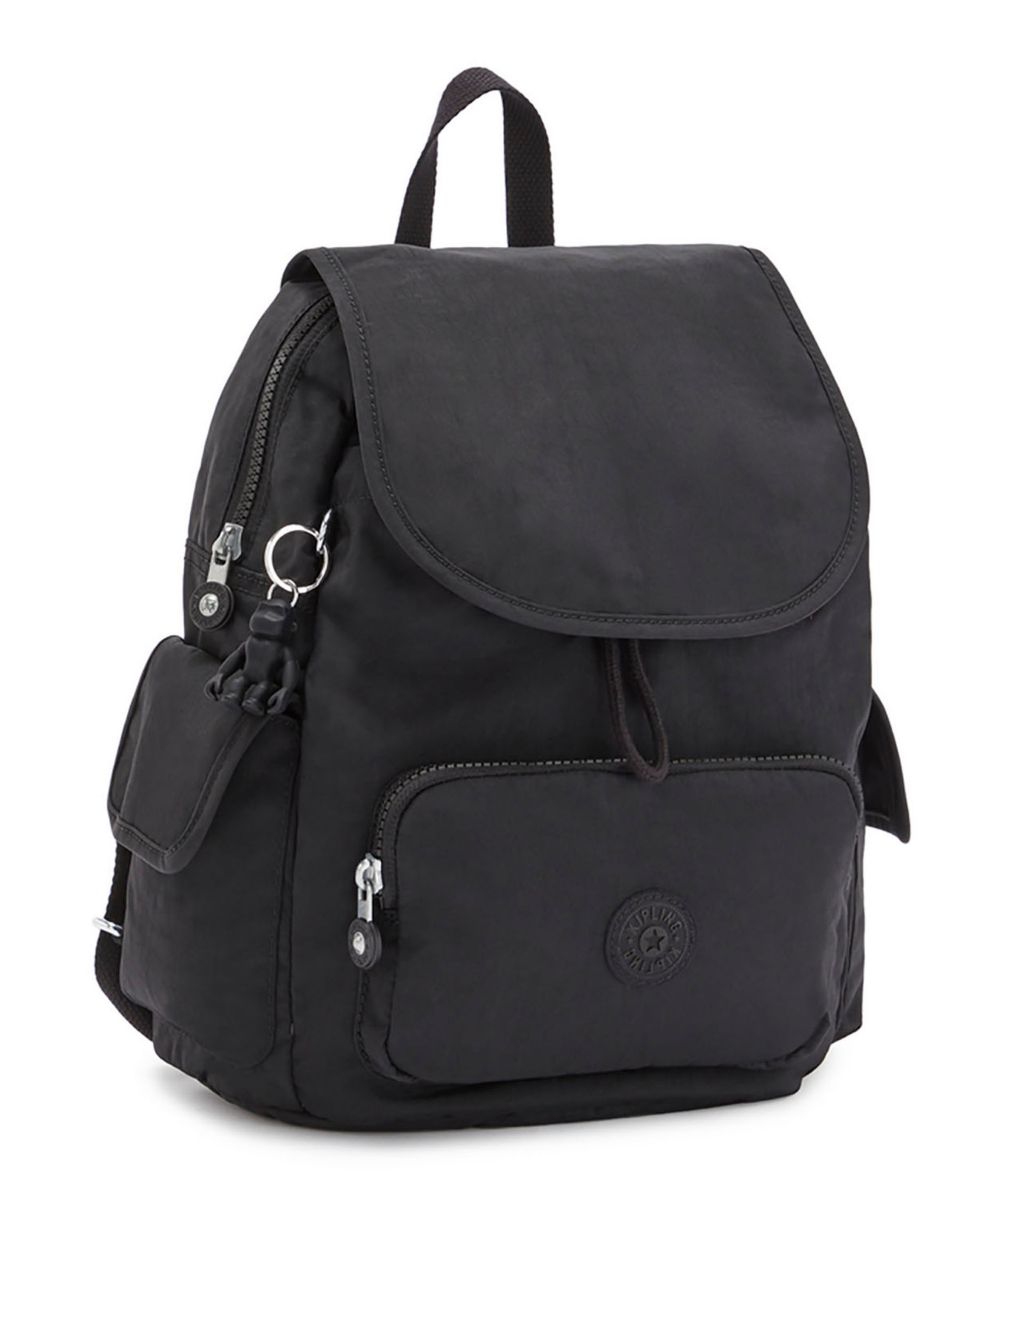 City Pack Water Resistant Backpack image 1